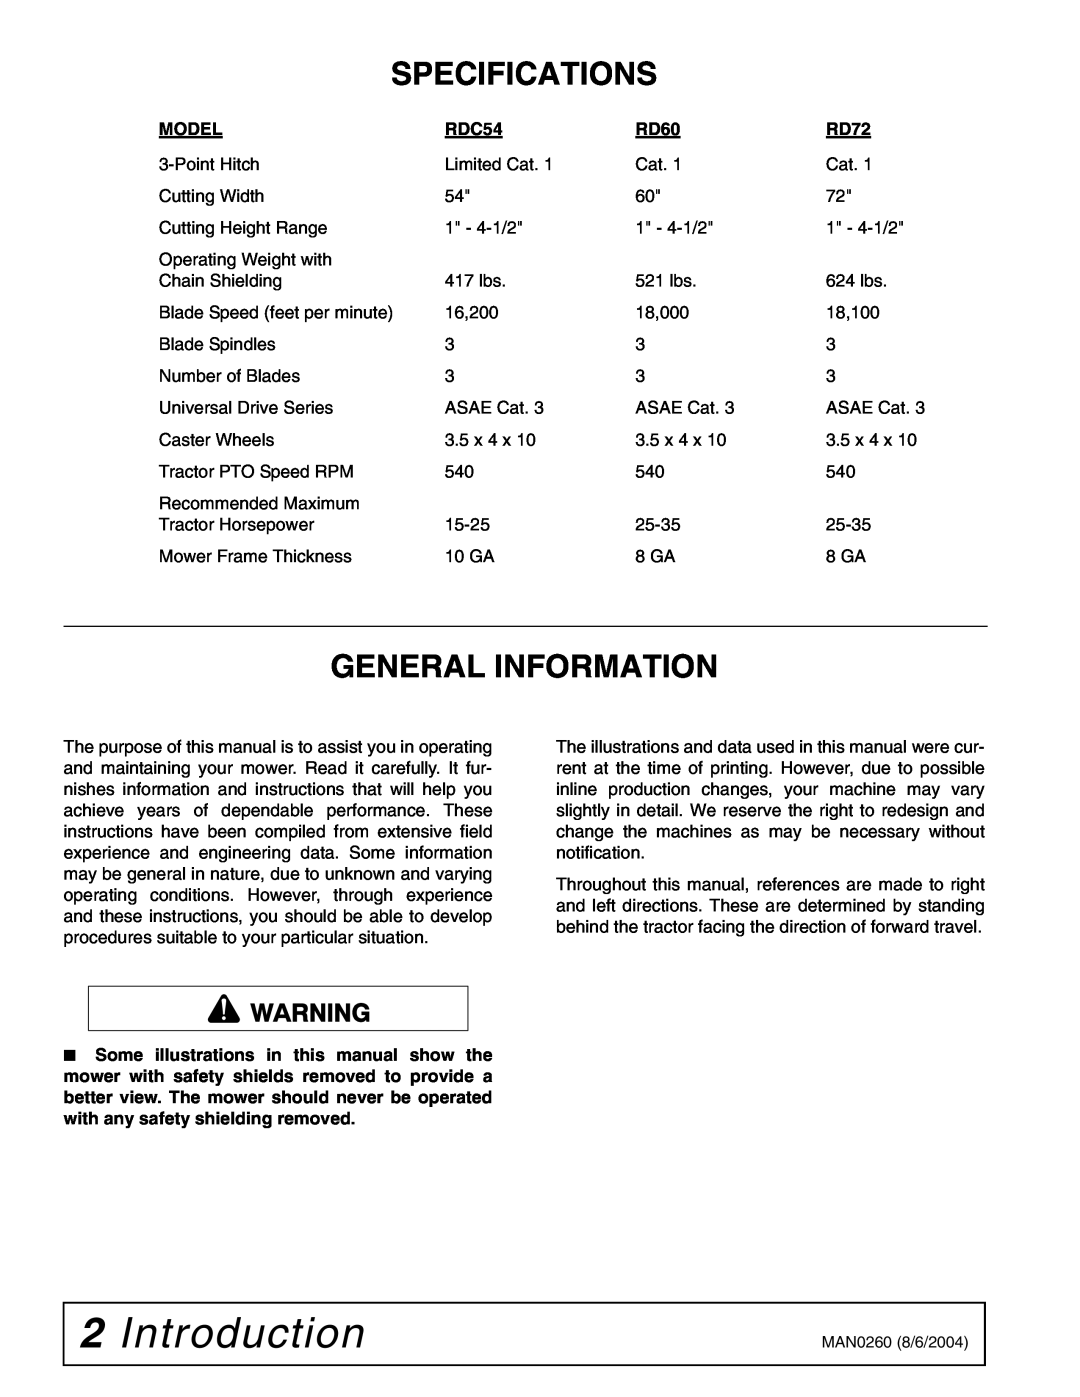 Woods Equipment RDC54, RD60, RD72 manual Introduction, Specifications, General Information 